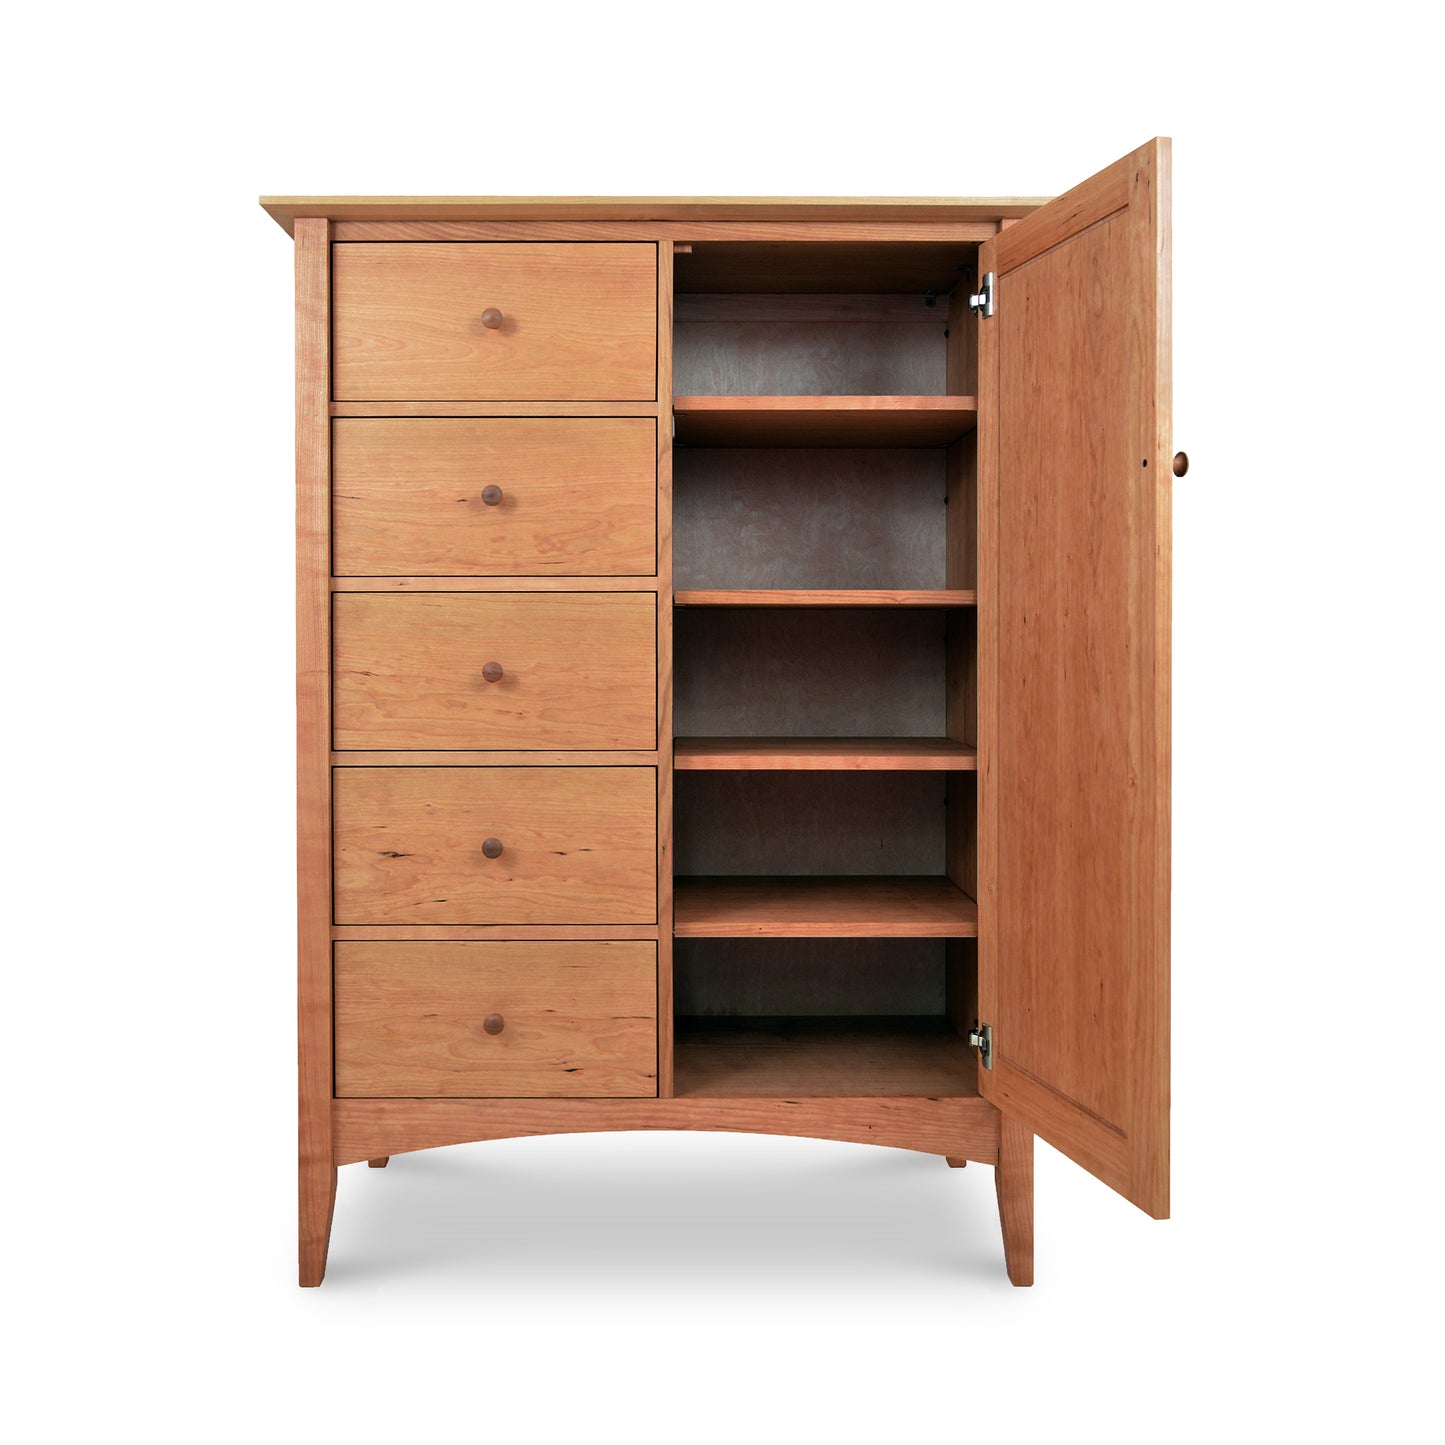 An Maple Corner Woodworks American Shaker sweater chest with multiple drawers on the left and shelves on the right, with one door open, isolated on a white background.